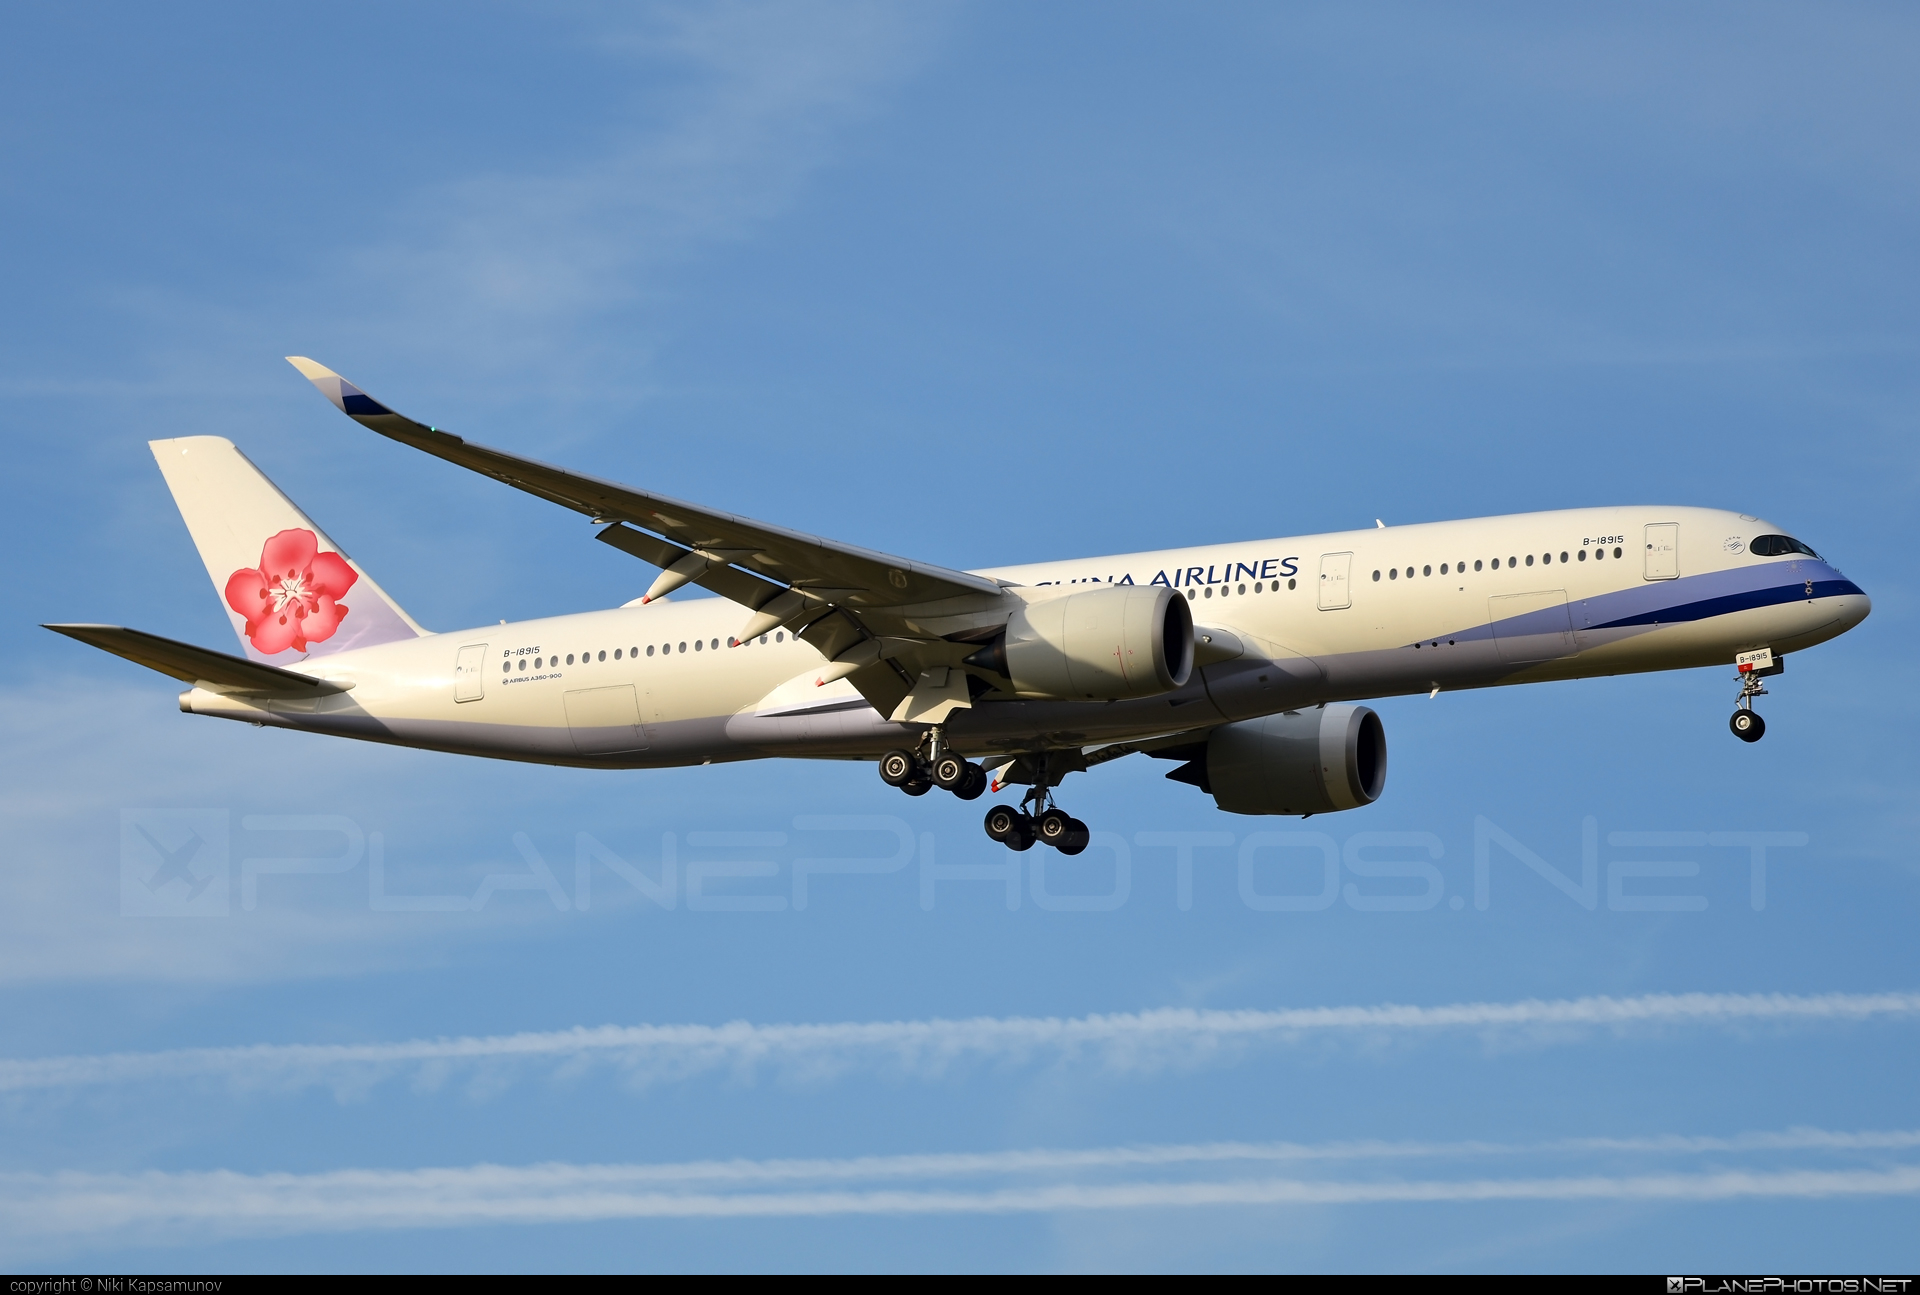 Airbus A350-941 - B-18915 operated by China Airlines #a350 #a350family #airbus #airbus350 #chinaairlines #xwb